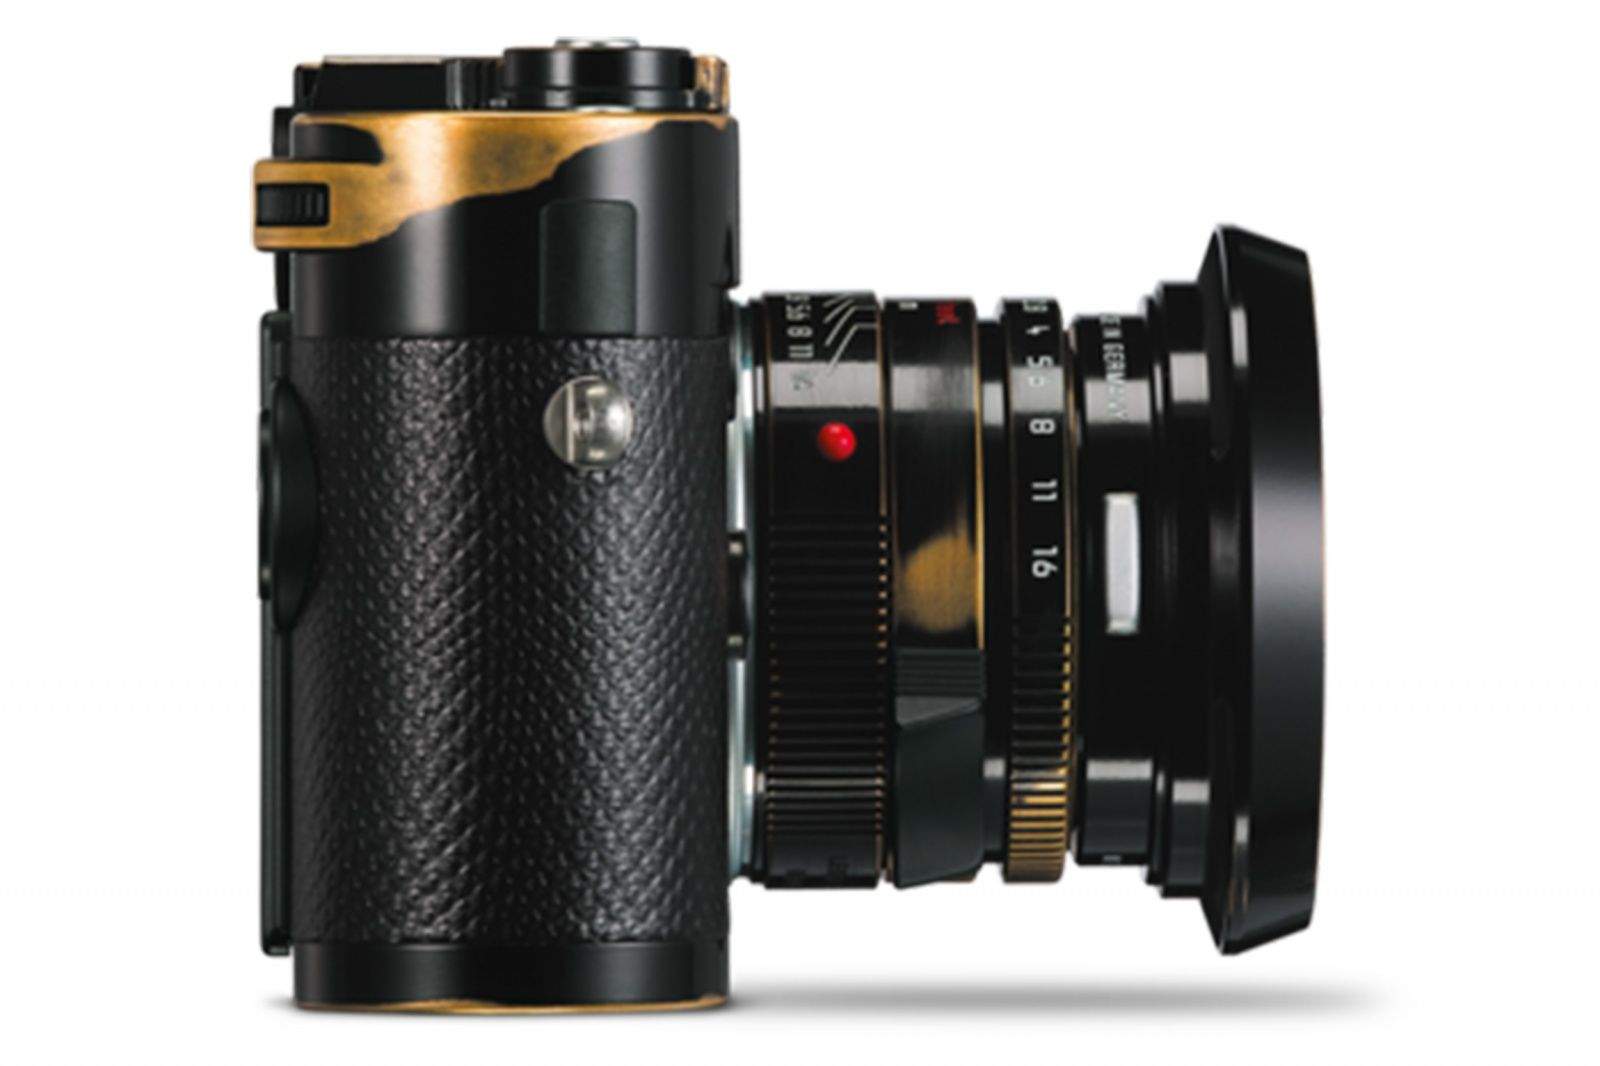 Rocker Lenny Kravitz helped Leica design a limited edition camera that has been deliberately aged by hand. Photo: Leica